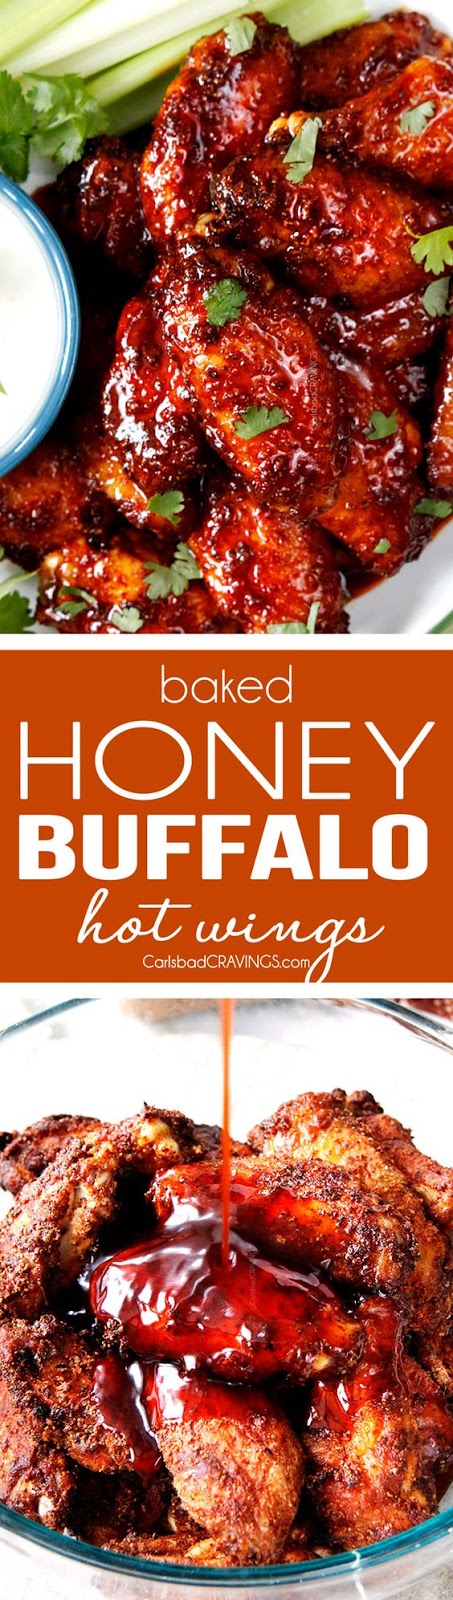 Sticky Buffalo Honey Hot Wings - the BEST buffalo wings you will ever devour and as easy as tossing in a rub, baking and coating in an easy, tantalizing sauce. #appetizer #wings #buffalowings #gameday